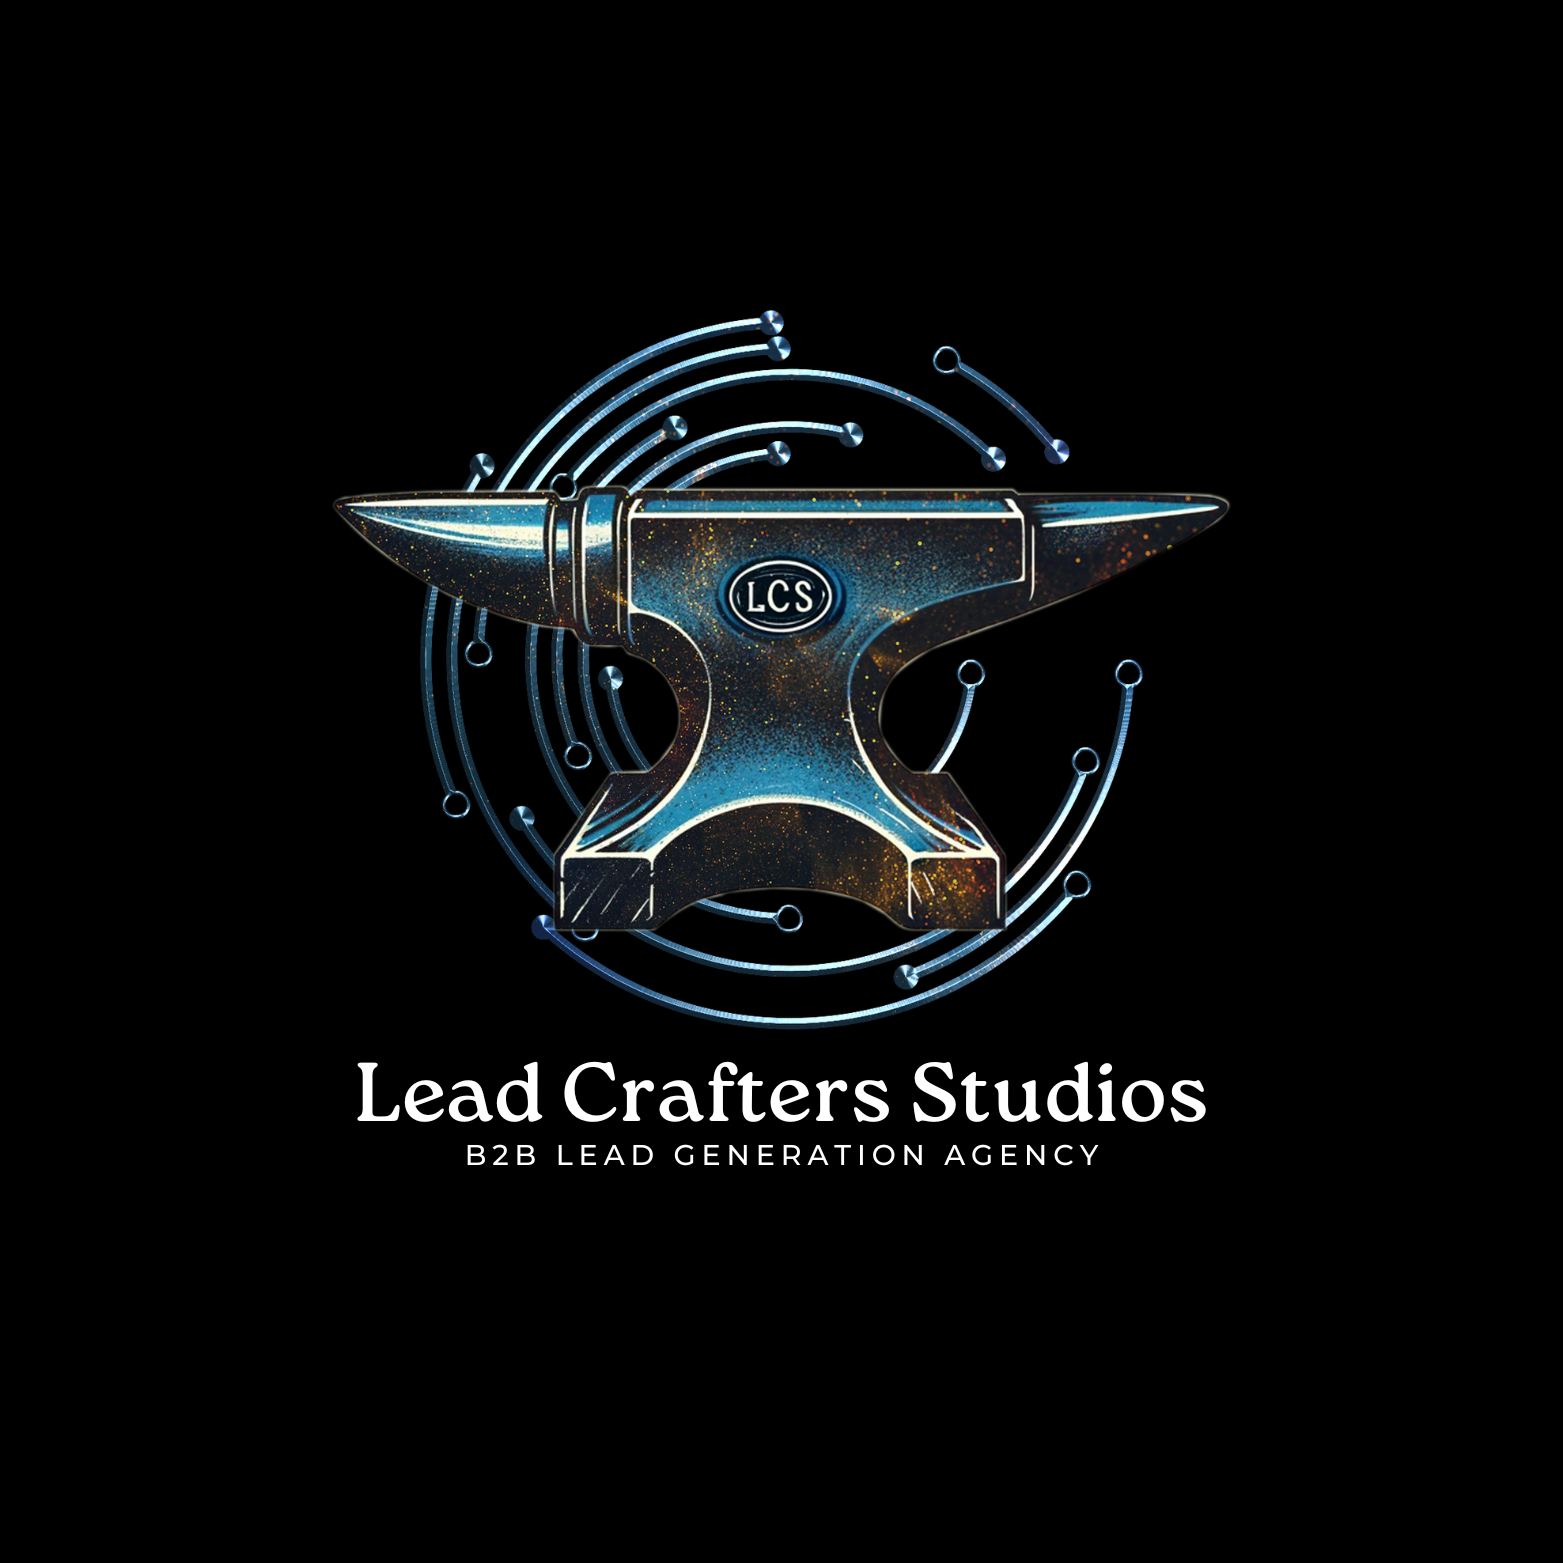 Lead Crafters Studios' black background Logo.